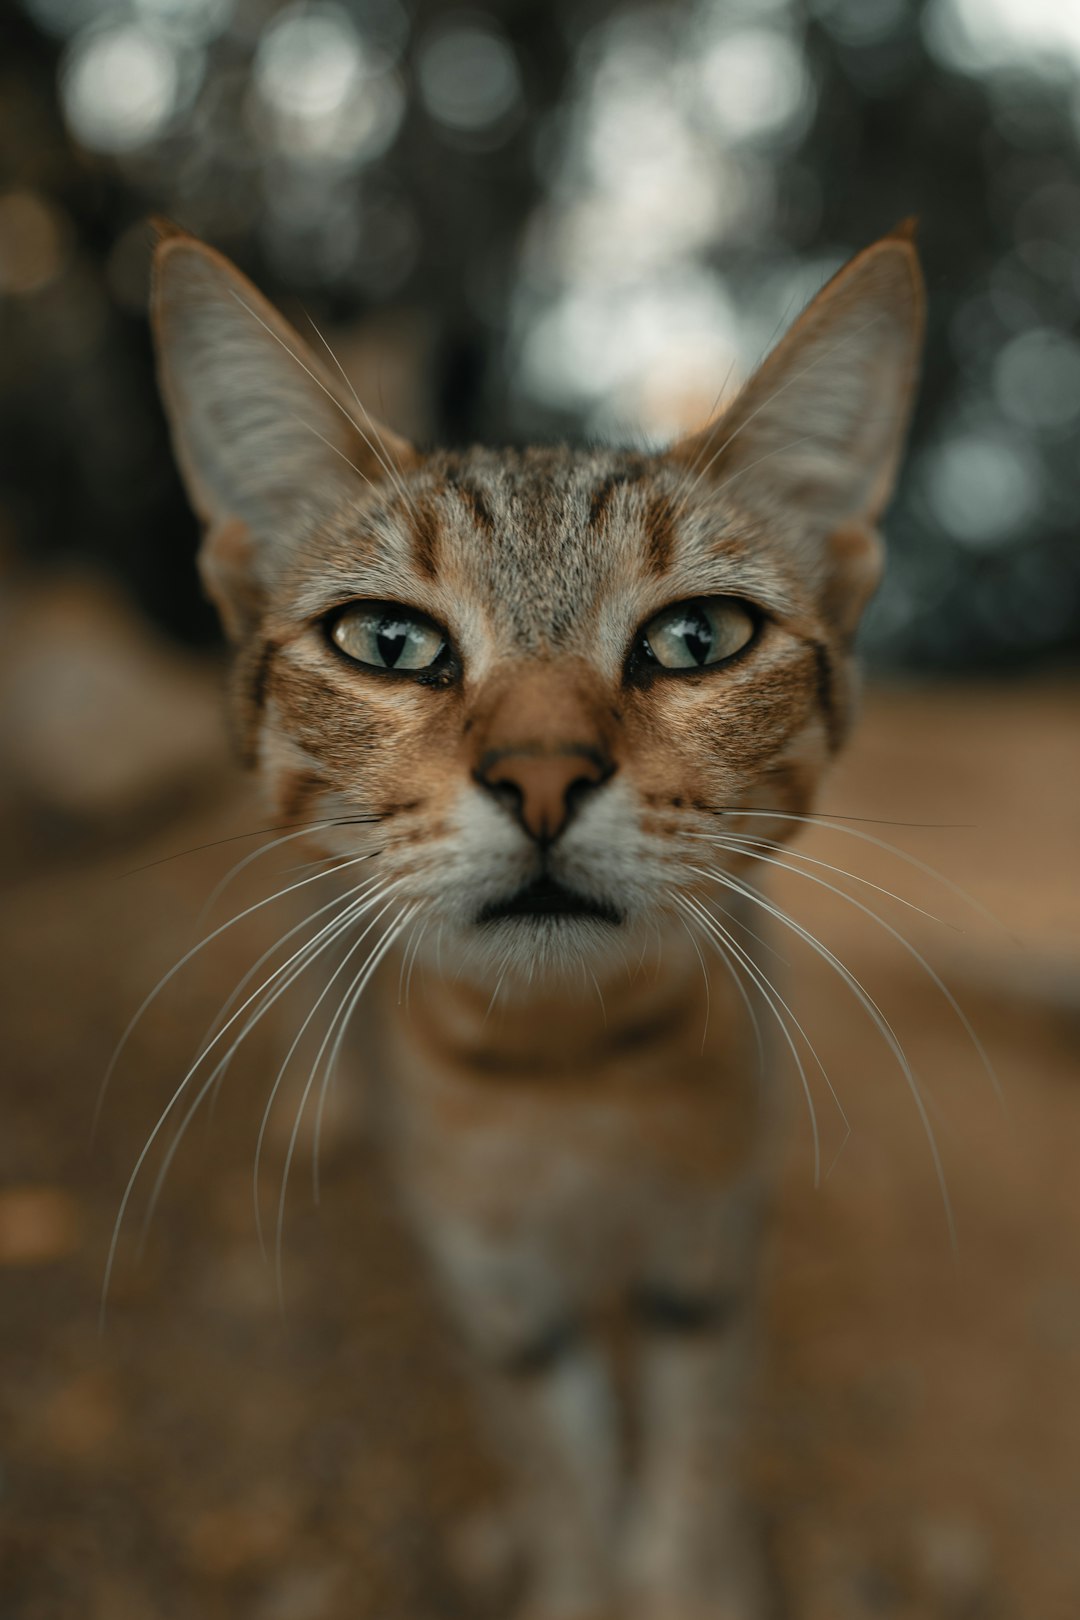 A wild cat I found in Italy that was very interested in my camera lens